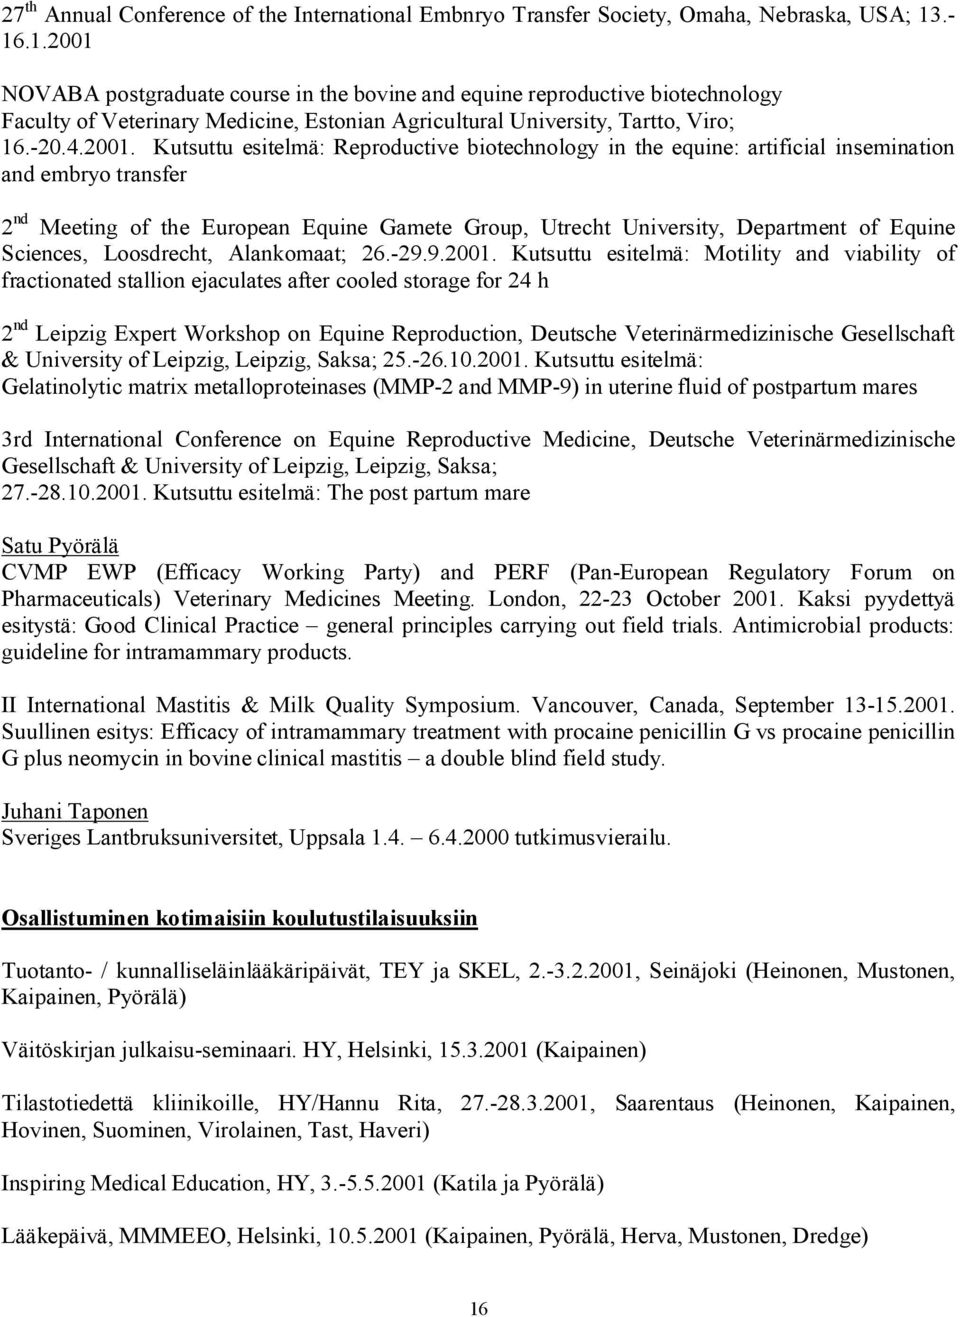 NOVABA postgraduate course in the bovine and equine reproductive biotechnology Faculty of Veterinary Medicine, Estonian Agricultural University, Tartto, Viro; 16.-20.4.2001.